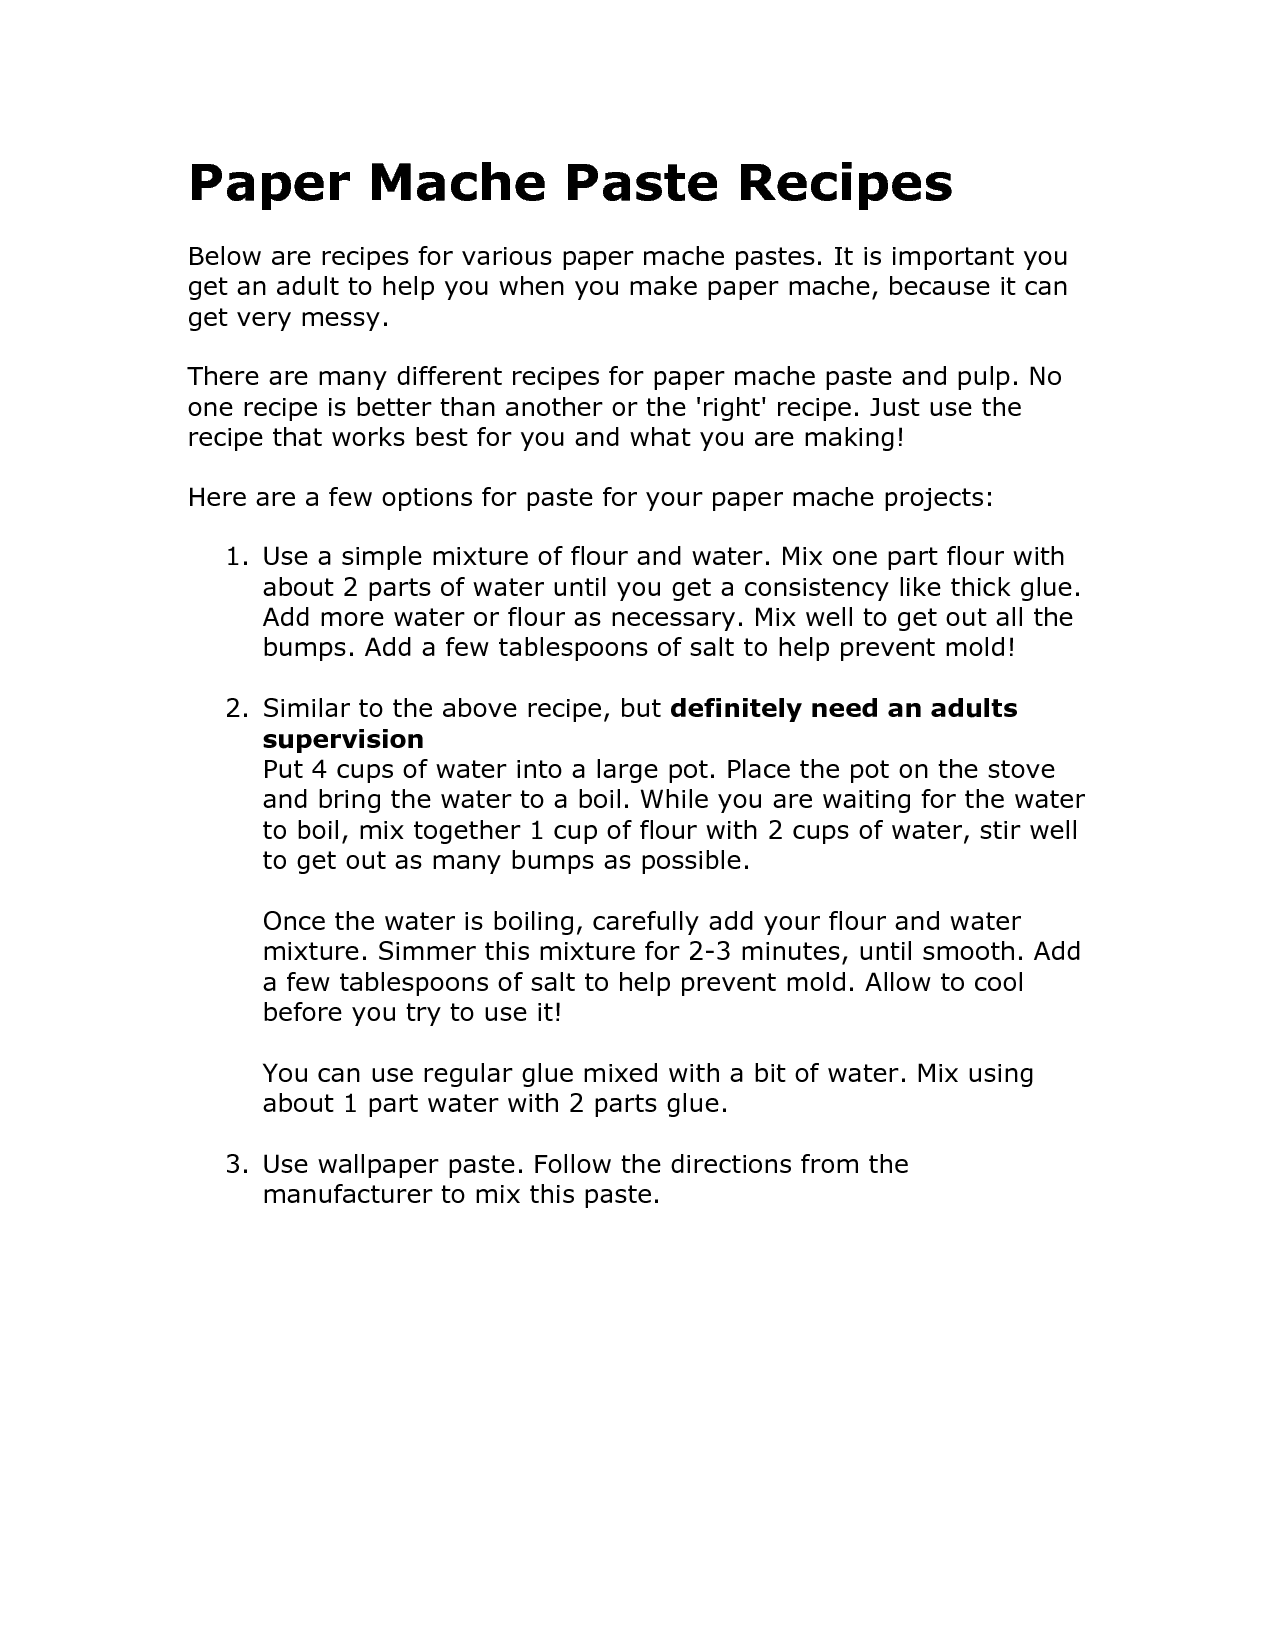 Paper Mache Paste Recipes By Lindahy